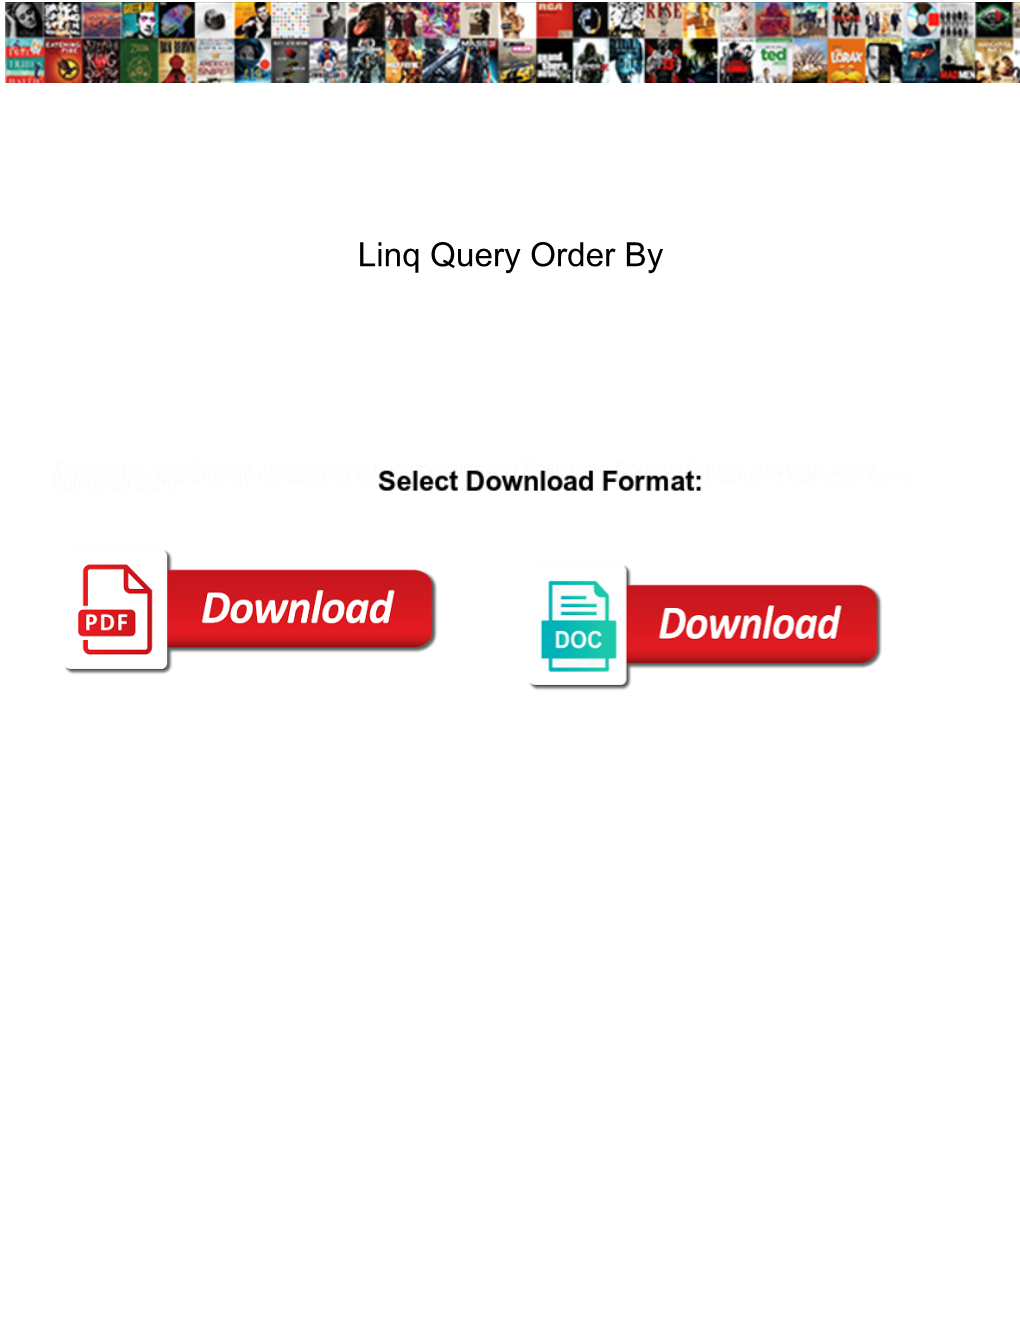 Linq Query Order By